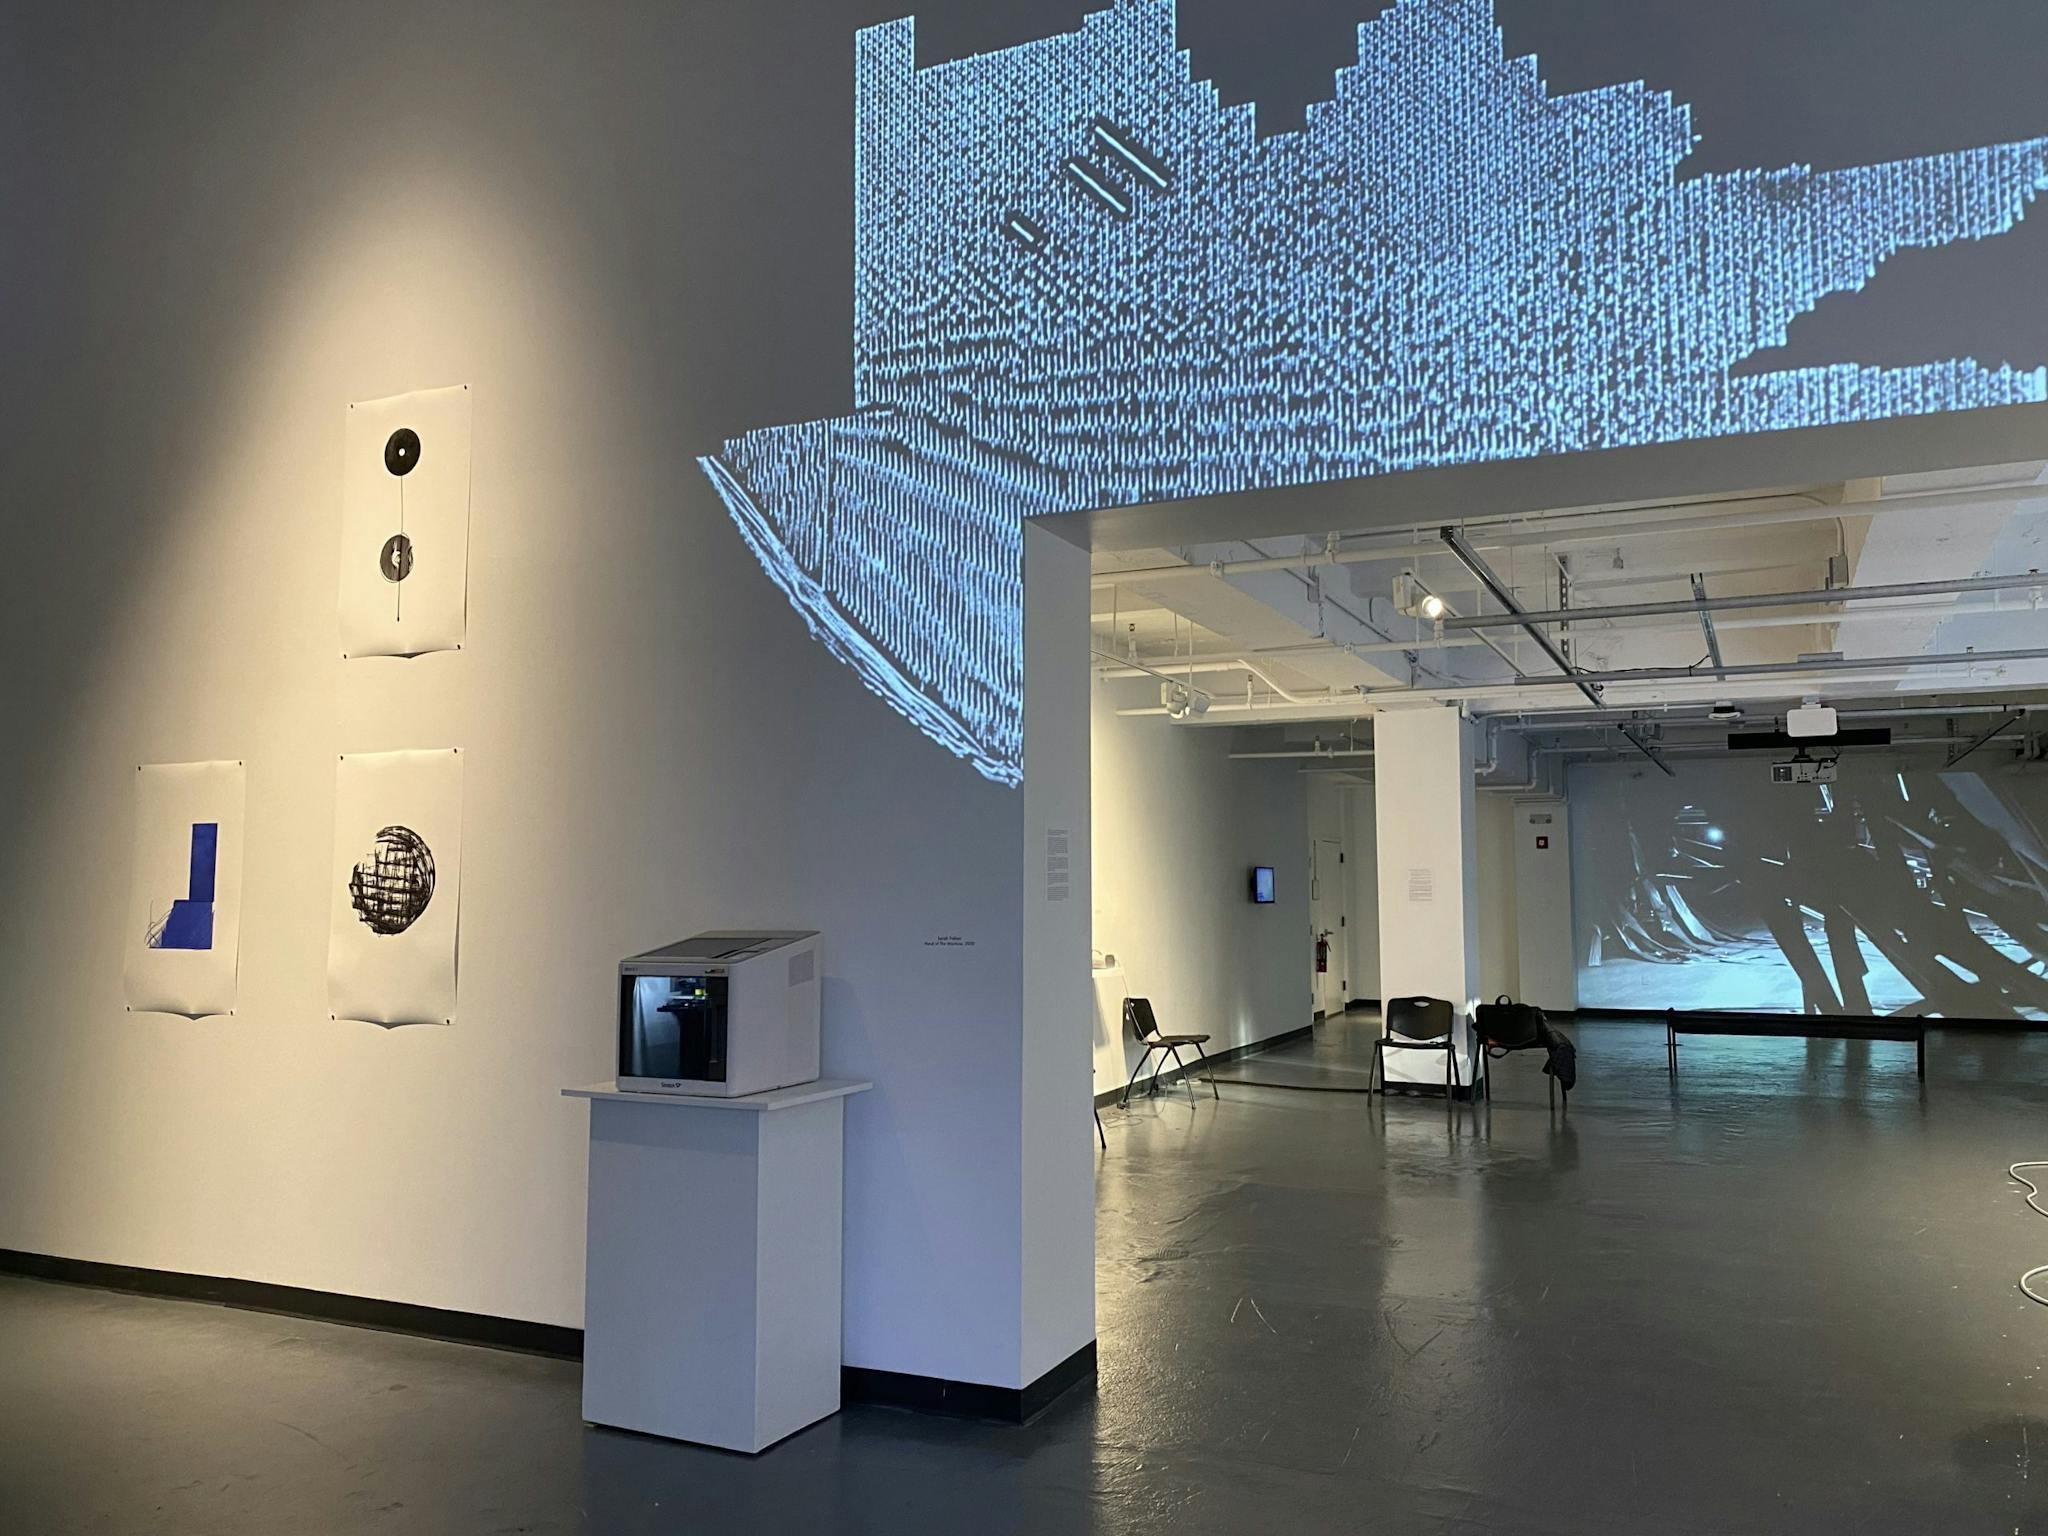 A projection against the wall illuminates the space at the Emerson Contemporary Media Art Gallery.